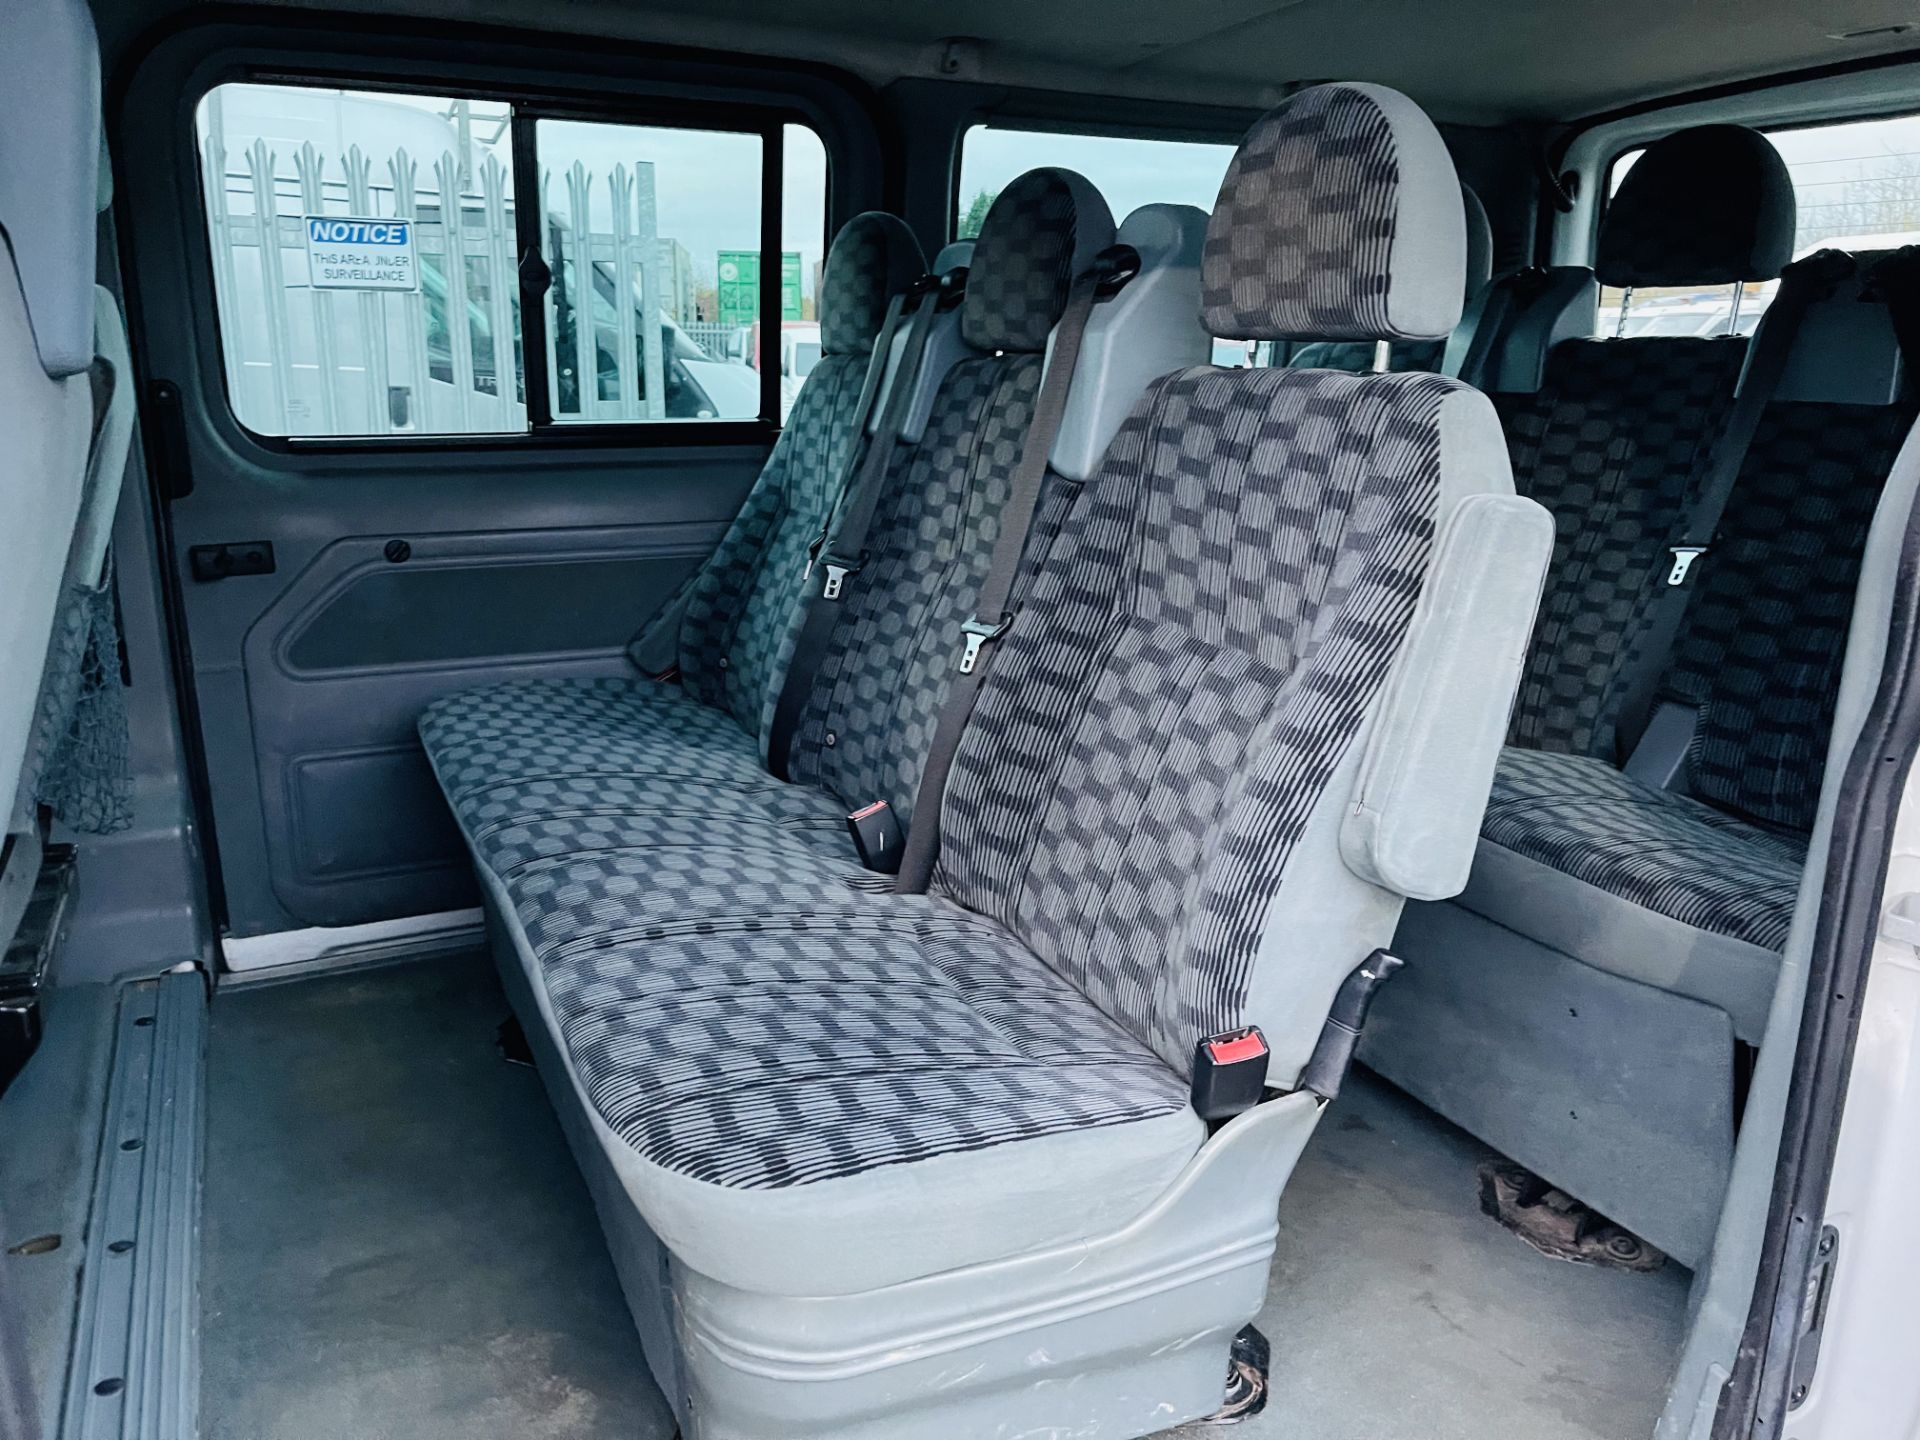 ** ON SALE ** Ford Transit Toureno 2.2 TDCI Trend 2013 '13 Reg' 9 seats - Air Con - Cruise Control** - Image 10 of 25